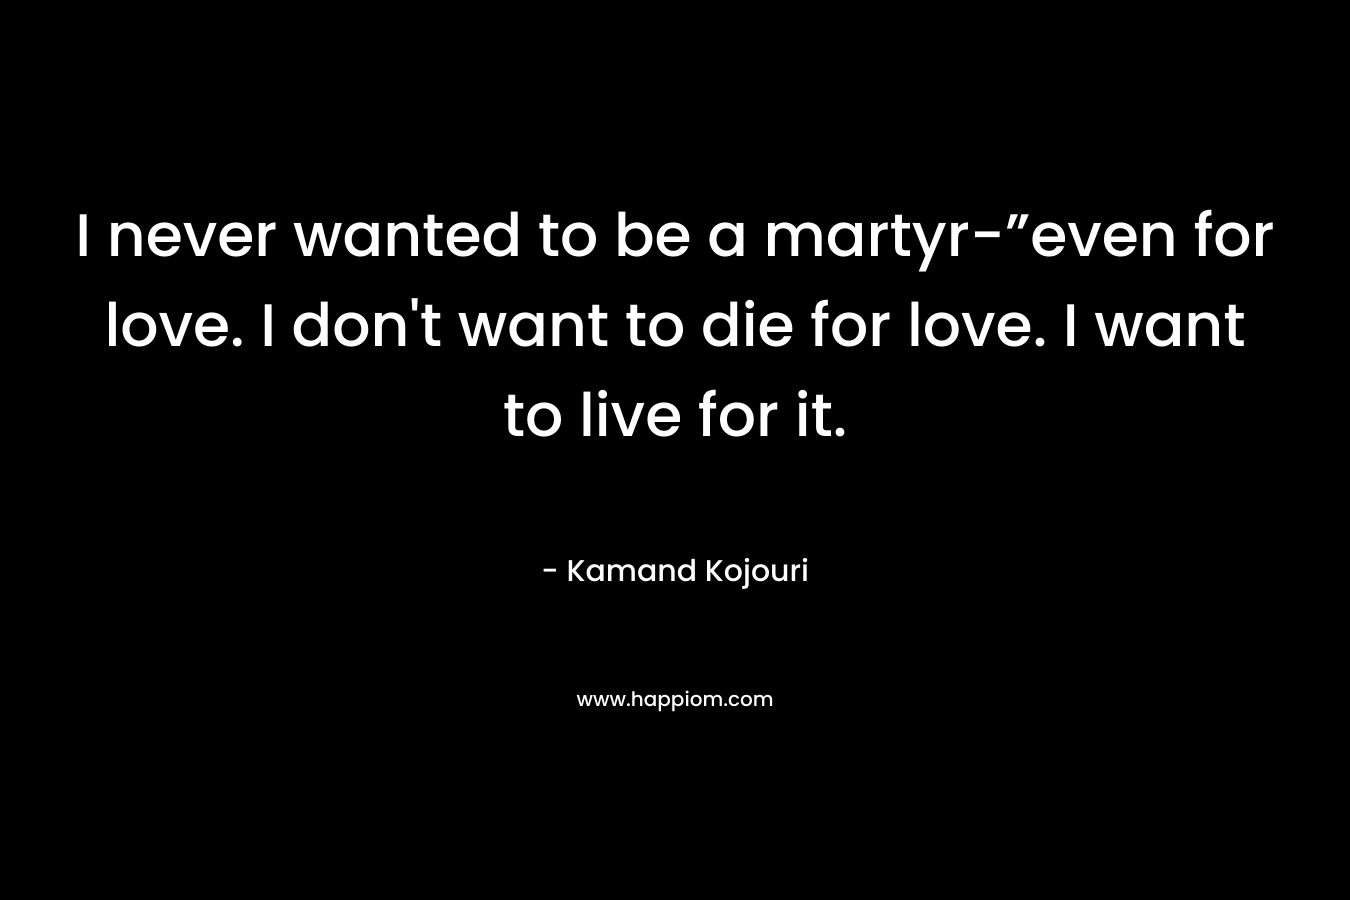 I never wanted to be a martyr-”even for love. I don't want to die for love. I want to live for it.